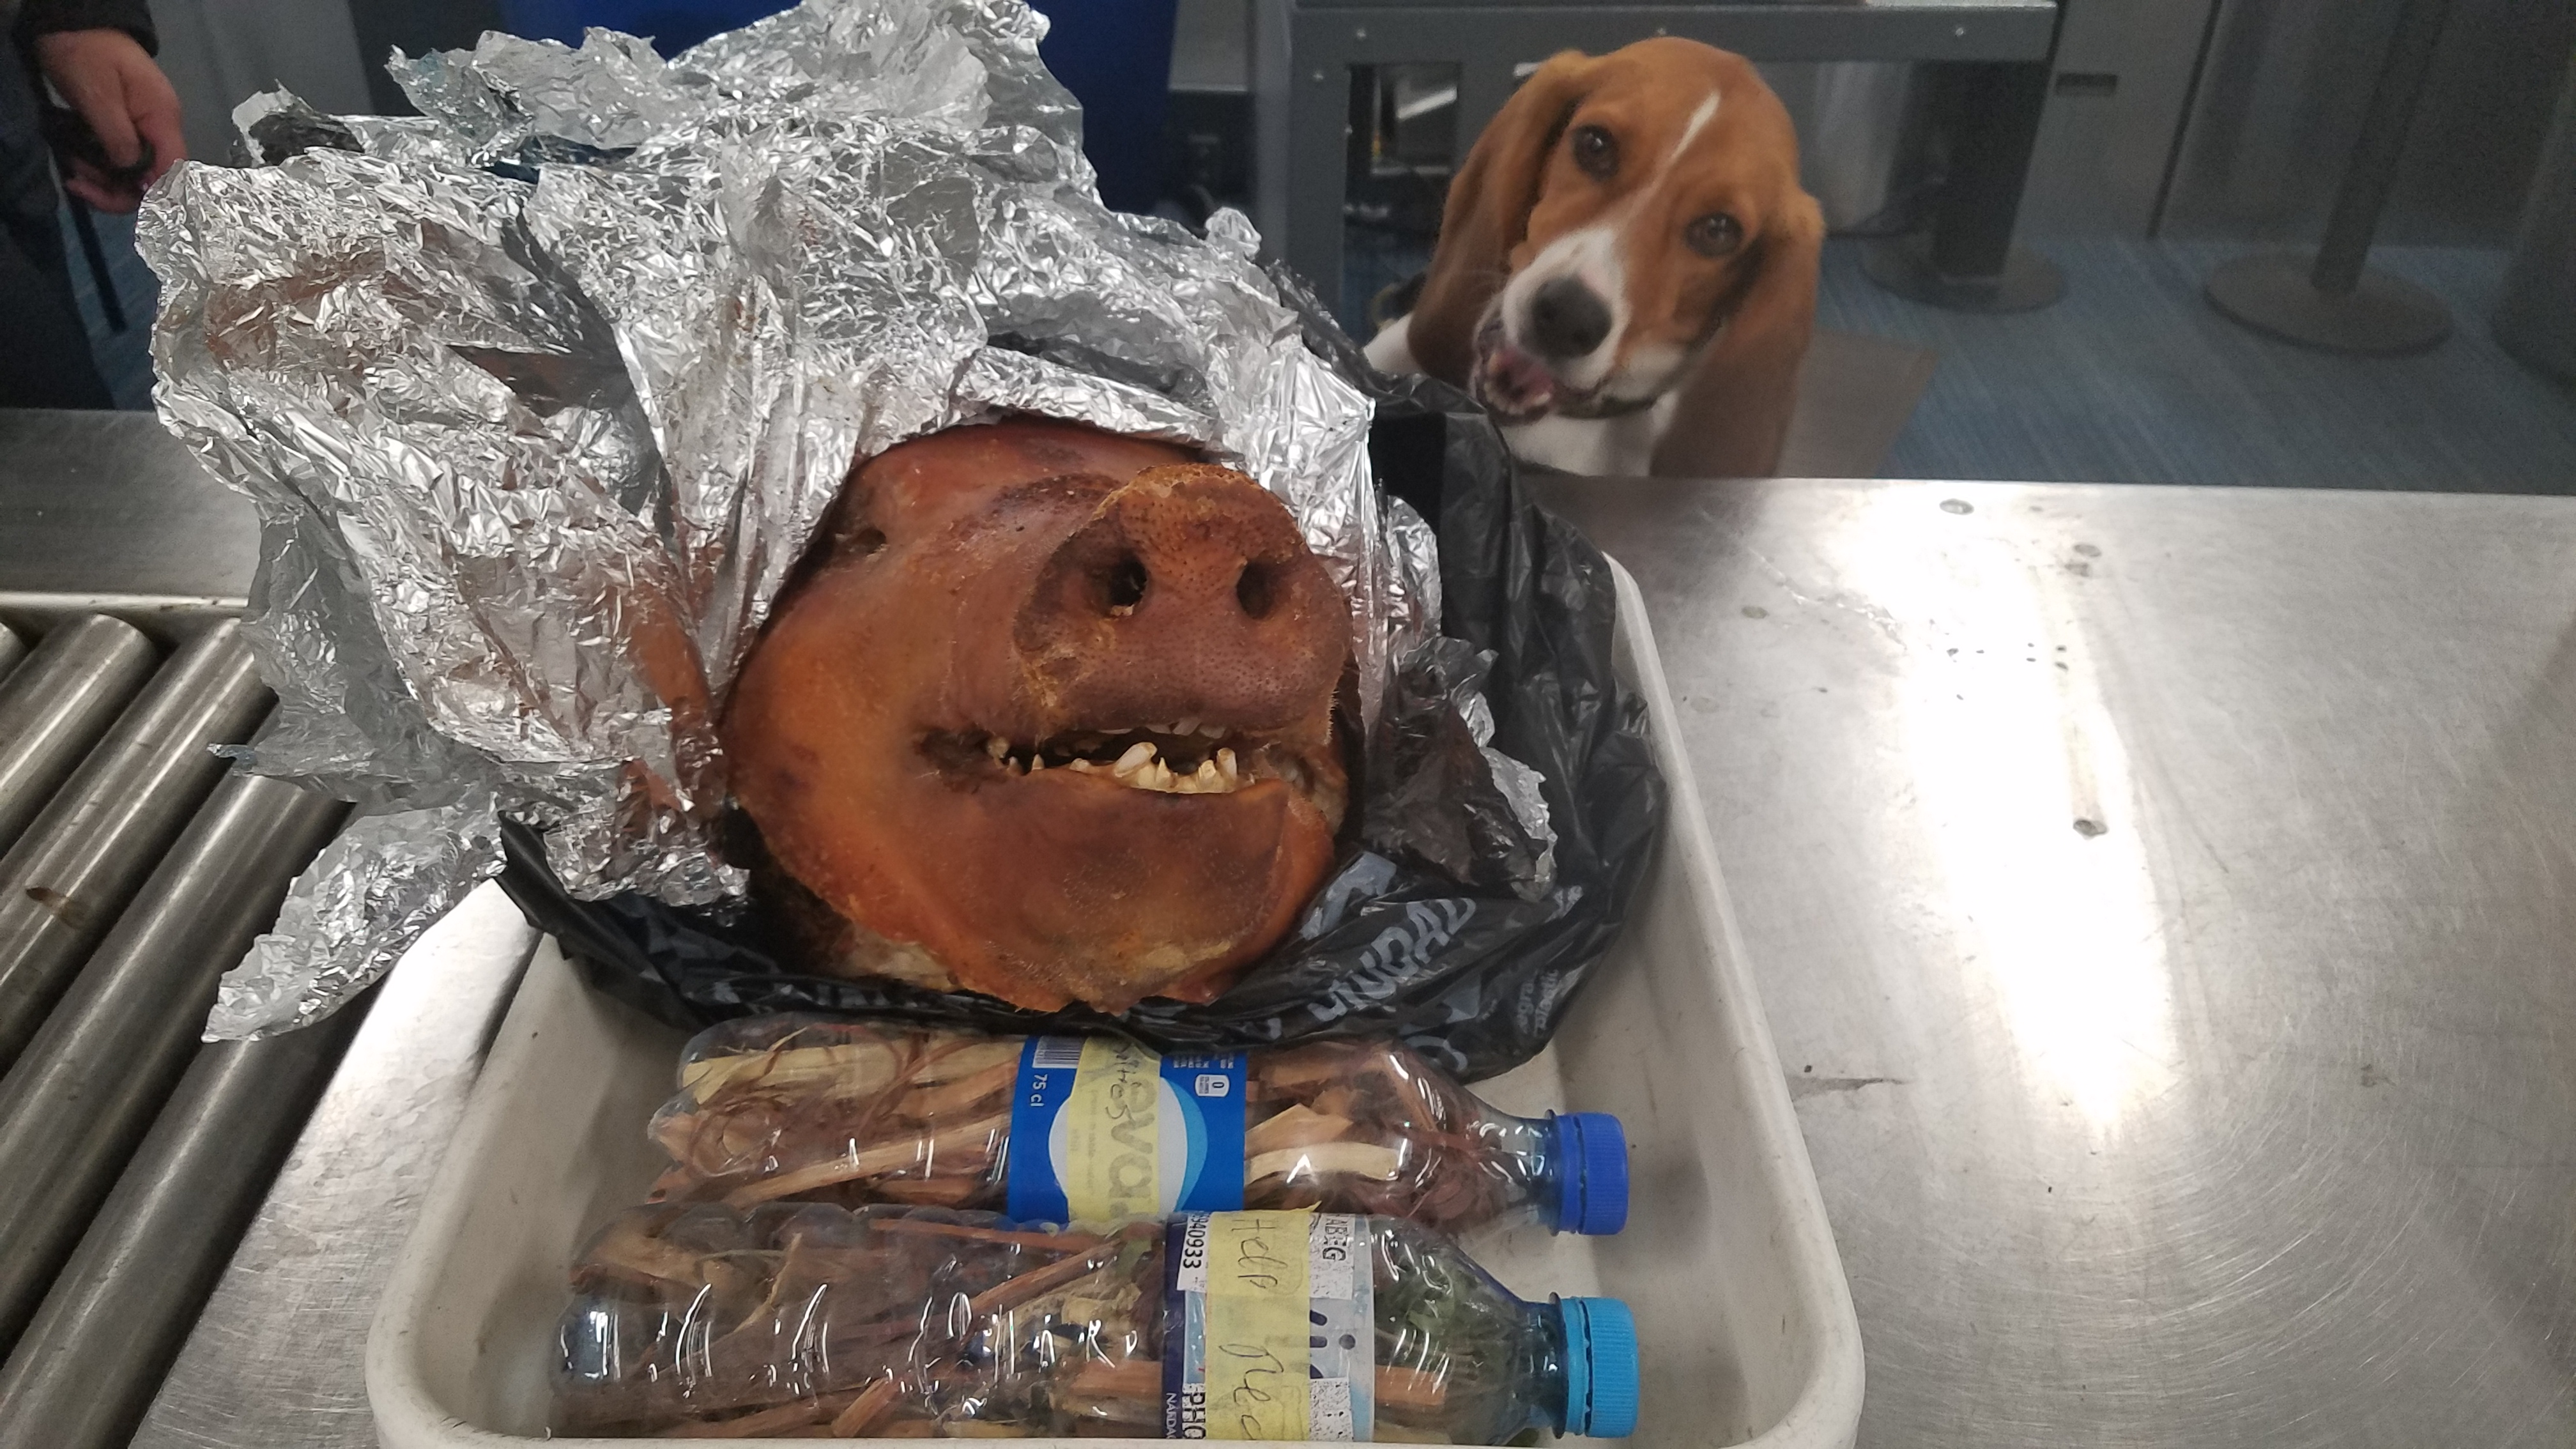 A CBP beagle admires the head of a roasted pig he found in a passenger’s checked baggage. 